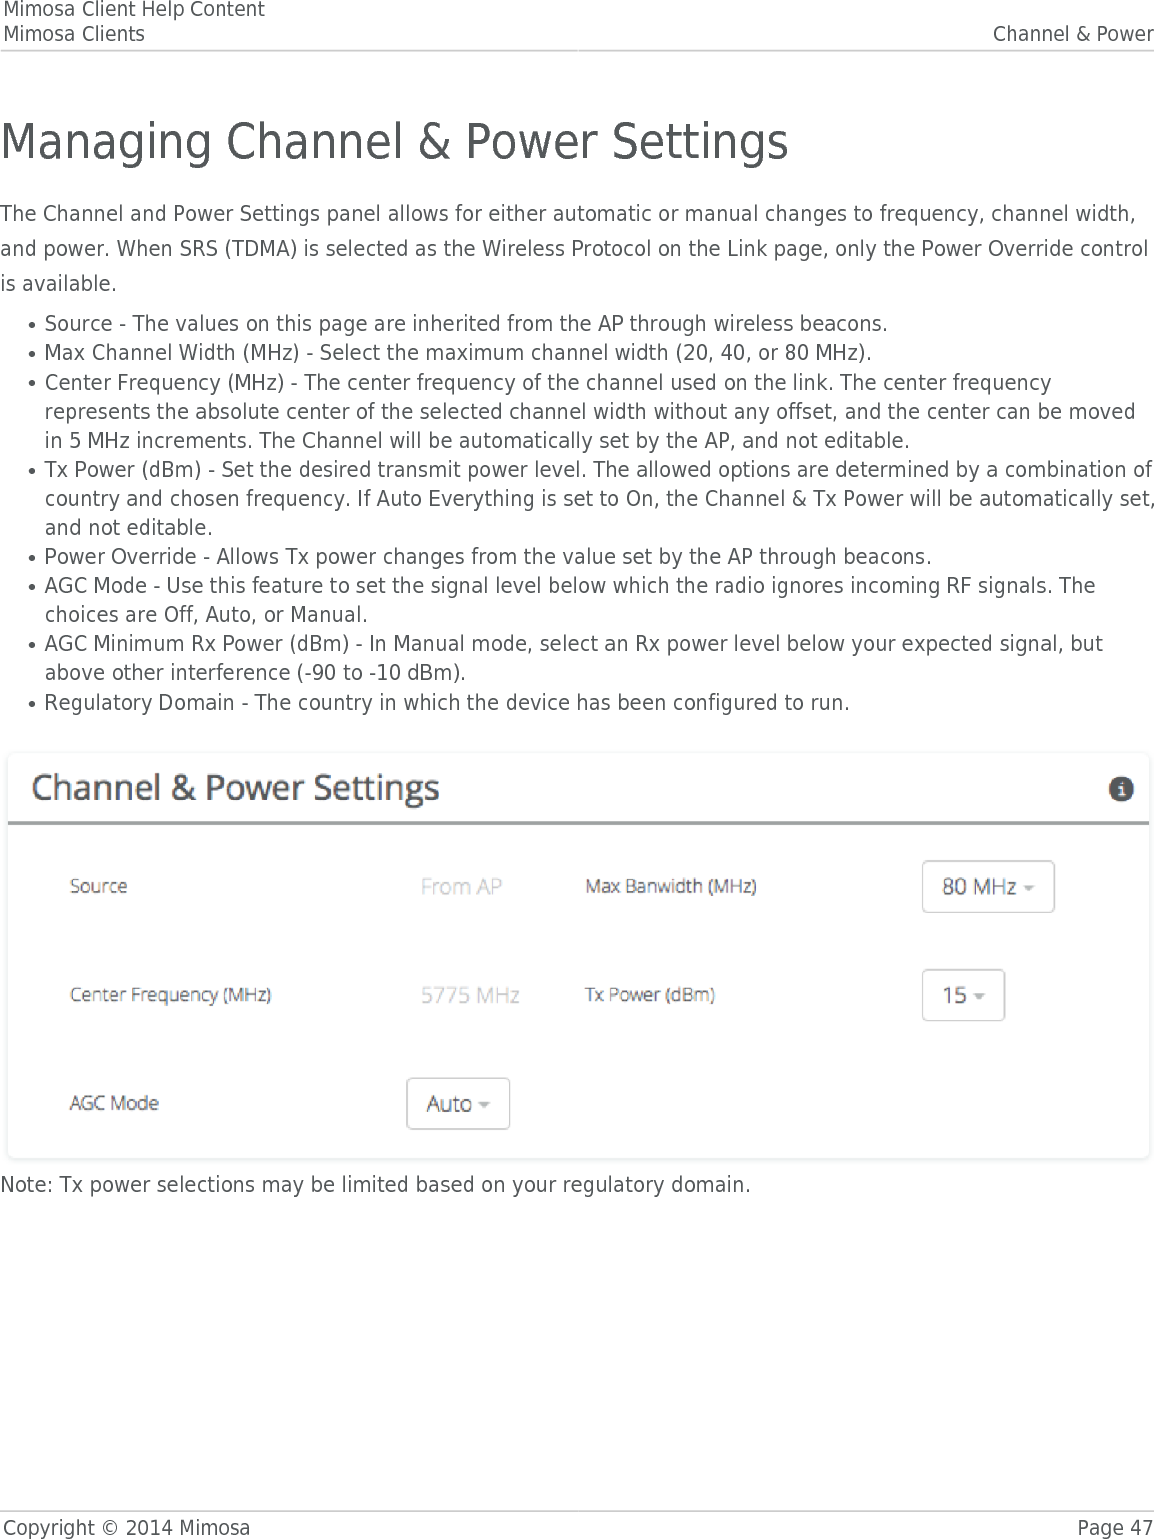 Mimosa Client Help ContentMimosa Clients Channel &amp; PowerCopyright © 2014 Mimosa Page 47Managing Channel &amp; Power SettingsThe Channel and Power Settings panel allows for either automatic or manual changes to frequency, channel width,and power. When SRS (TDMA) is selected as the Wireless Protocol on the Link page, only the Power Override controlis available.Source - The values on this page are inherited from the AP through wireless beacons.●Max Channel Width (MHz) - Select the maximum channel width (20, 40, or 80 MHz). ●Center Frequency (MHz) - The center frequency of the channel used on the link. The center frequency●represents the absolute center of the selected channel width without any offset, and the center can be movedin 5 MHz increments. The Channel will be automatically set by the AP, and not editable.Tx Power (dBm) - Set the desired transmit power level. The allowed options are determined by a combination of●country and chosen frequency. If Auto Everything is set to On, the Channel &amp; Tx Power will be automatically set,and not editable. Power Override - Allows Tx power changes from the value set by the AP through beacons.●AGC Mode - Use this feature to set the signal level below which the radio ignores incoming RF signals. The●choices are Off, Auto, or Manual.AGC Minimum Rx Power (dBm) - In Manual mode, select an Rx power level below your expected signal, but●above other interference (-90 to -10 dBm).Regulatory Domain - The country in which the device has been configured to run.● Note: Tx power selections may be limited based on your regulatory domain.